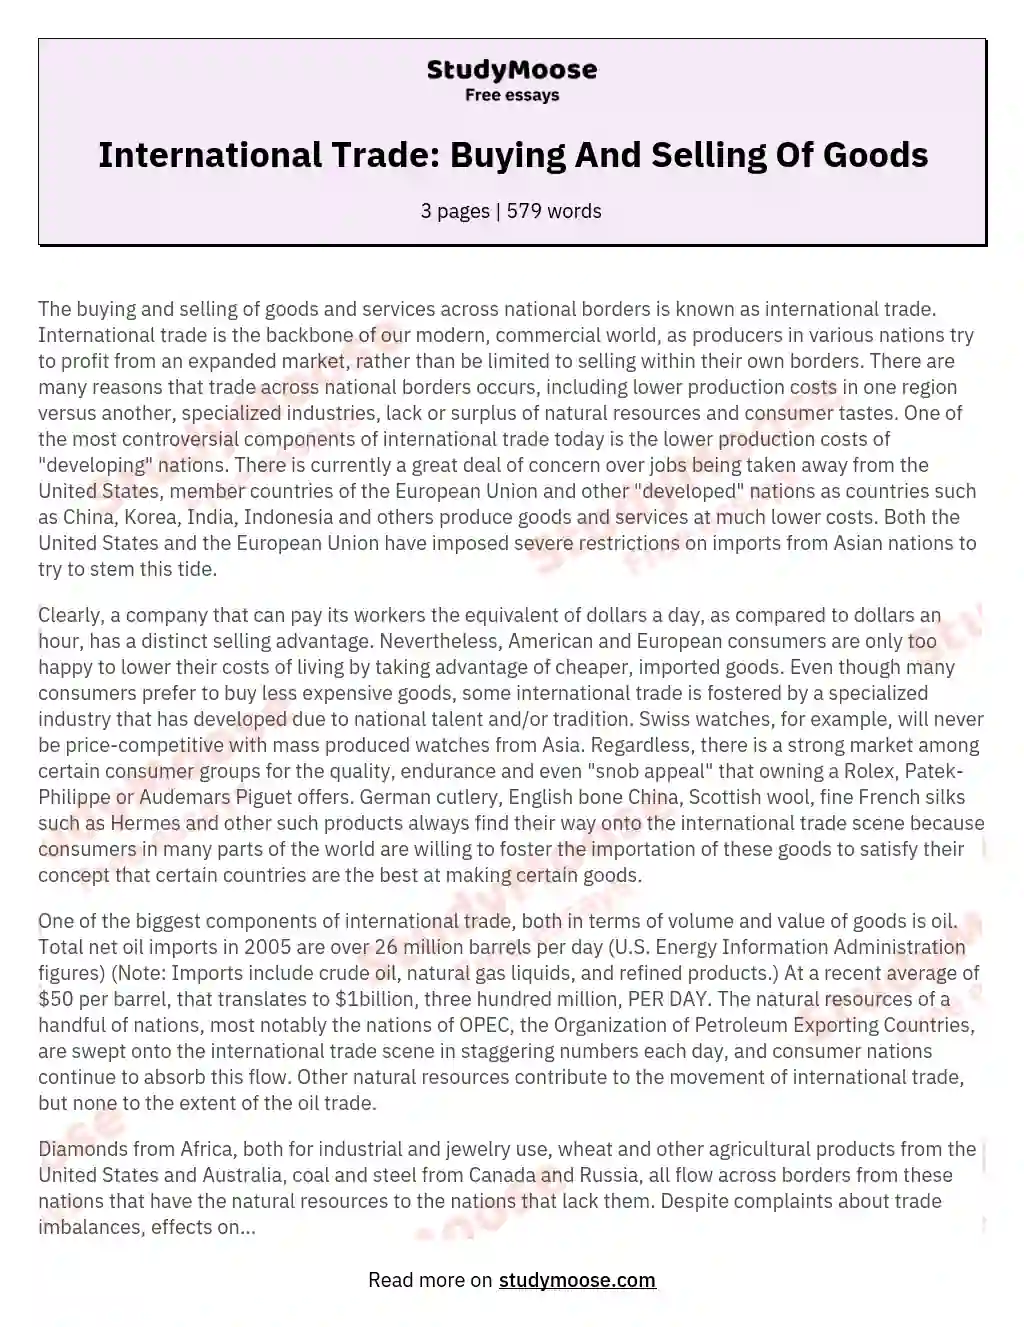 International Trade: Buying And Selling Of Goods